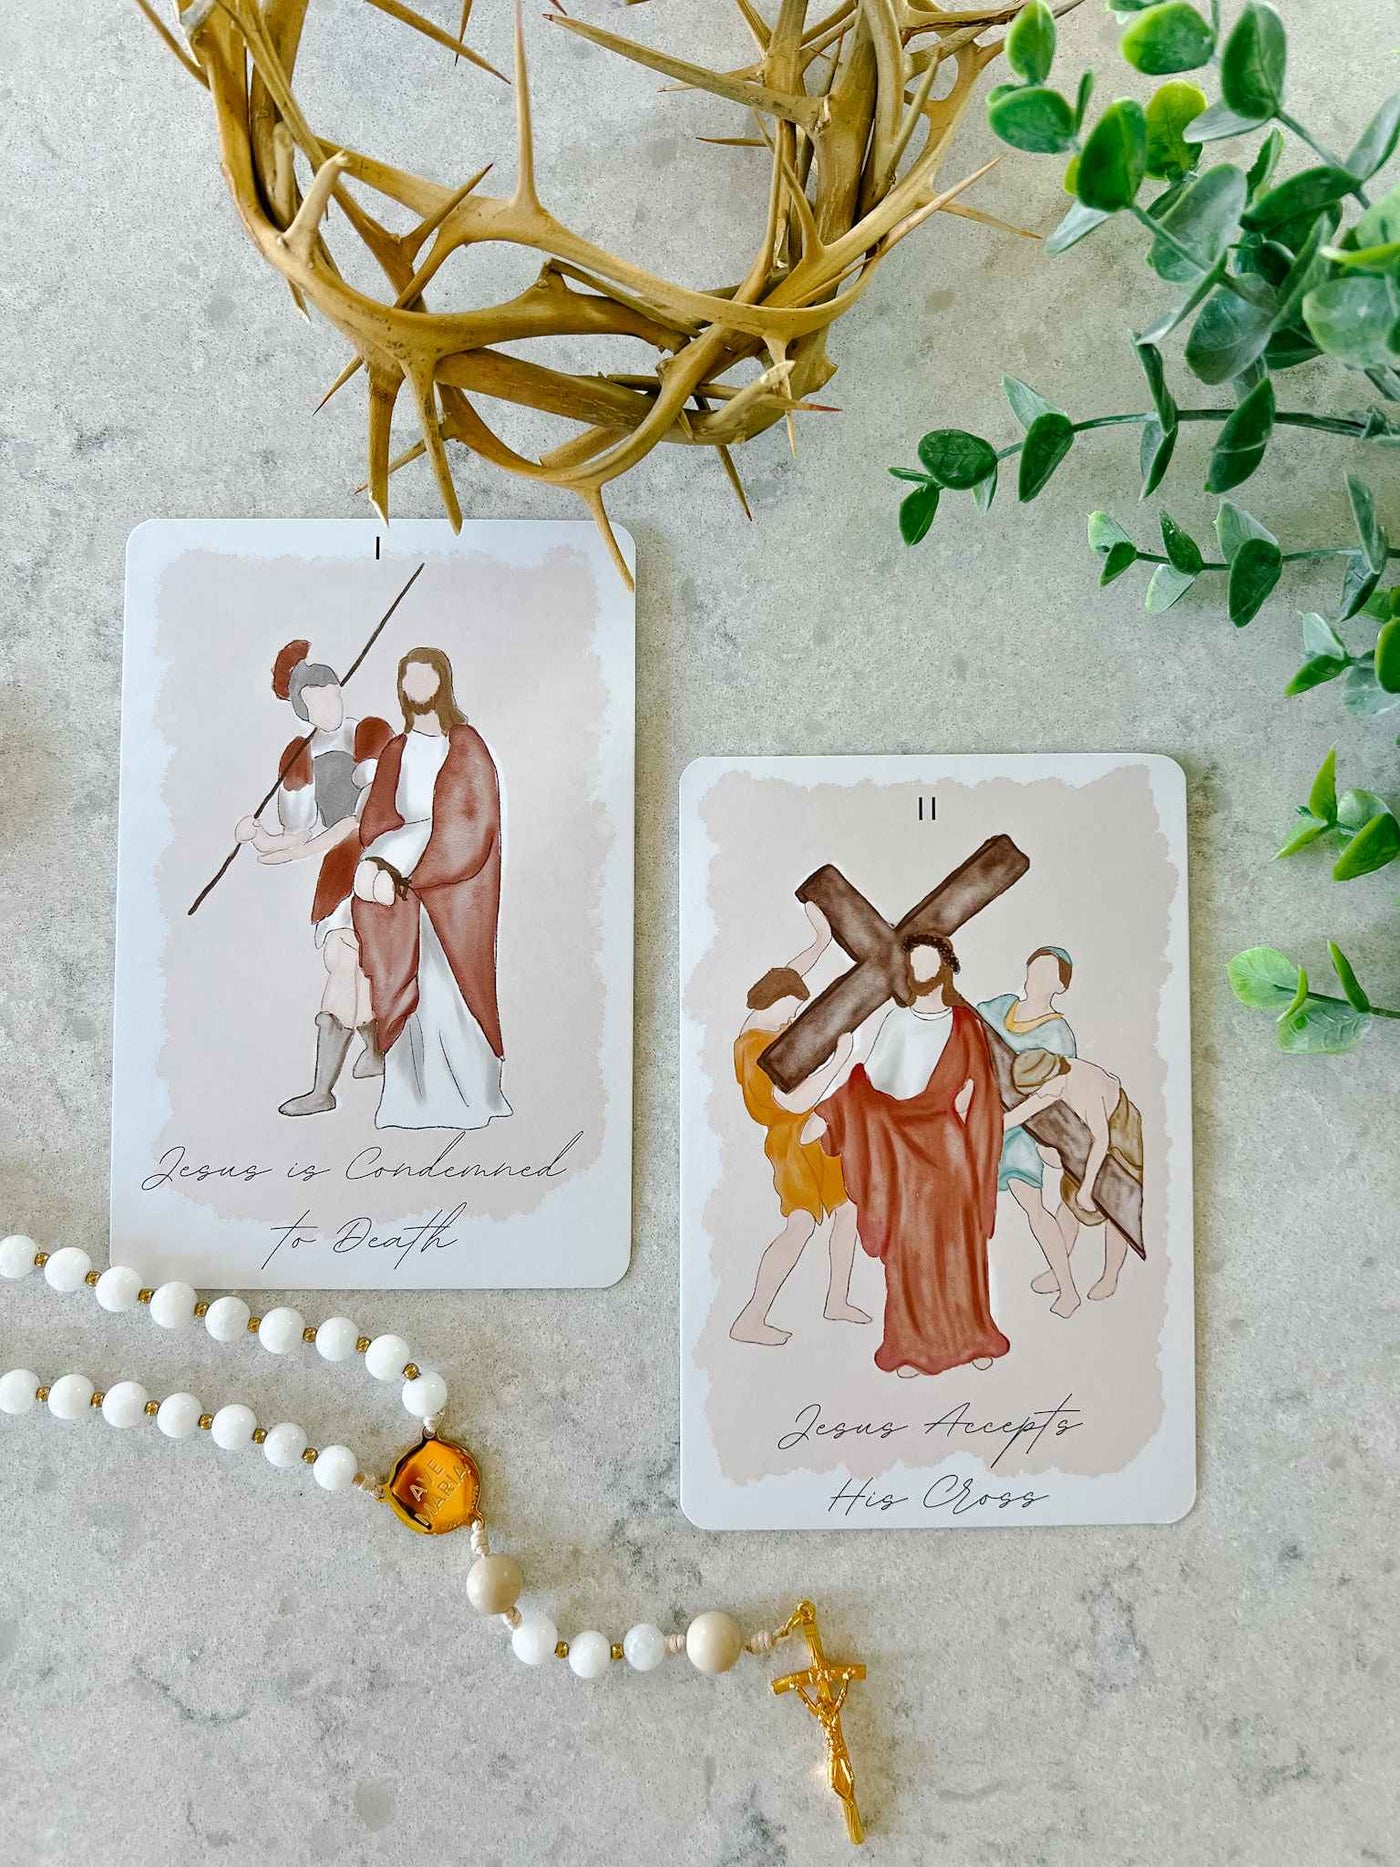 Stations of the Cross - Cards